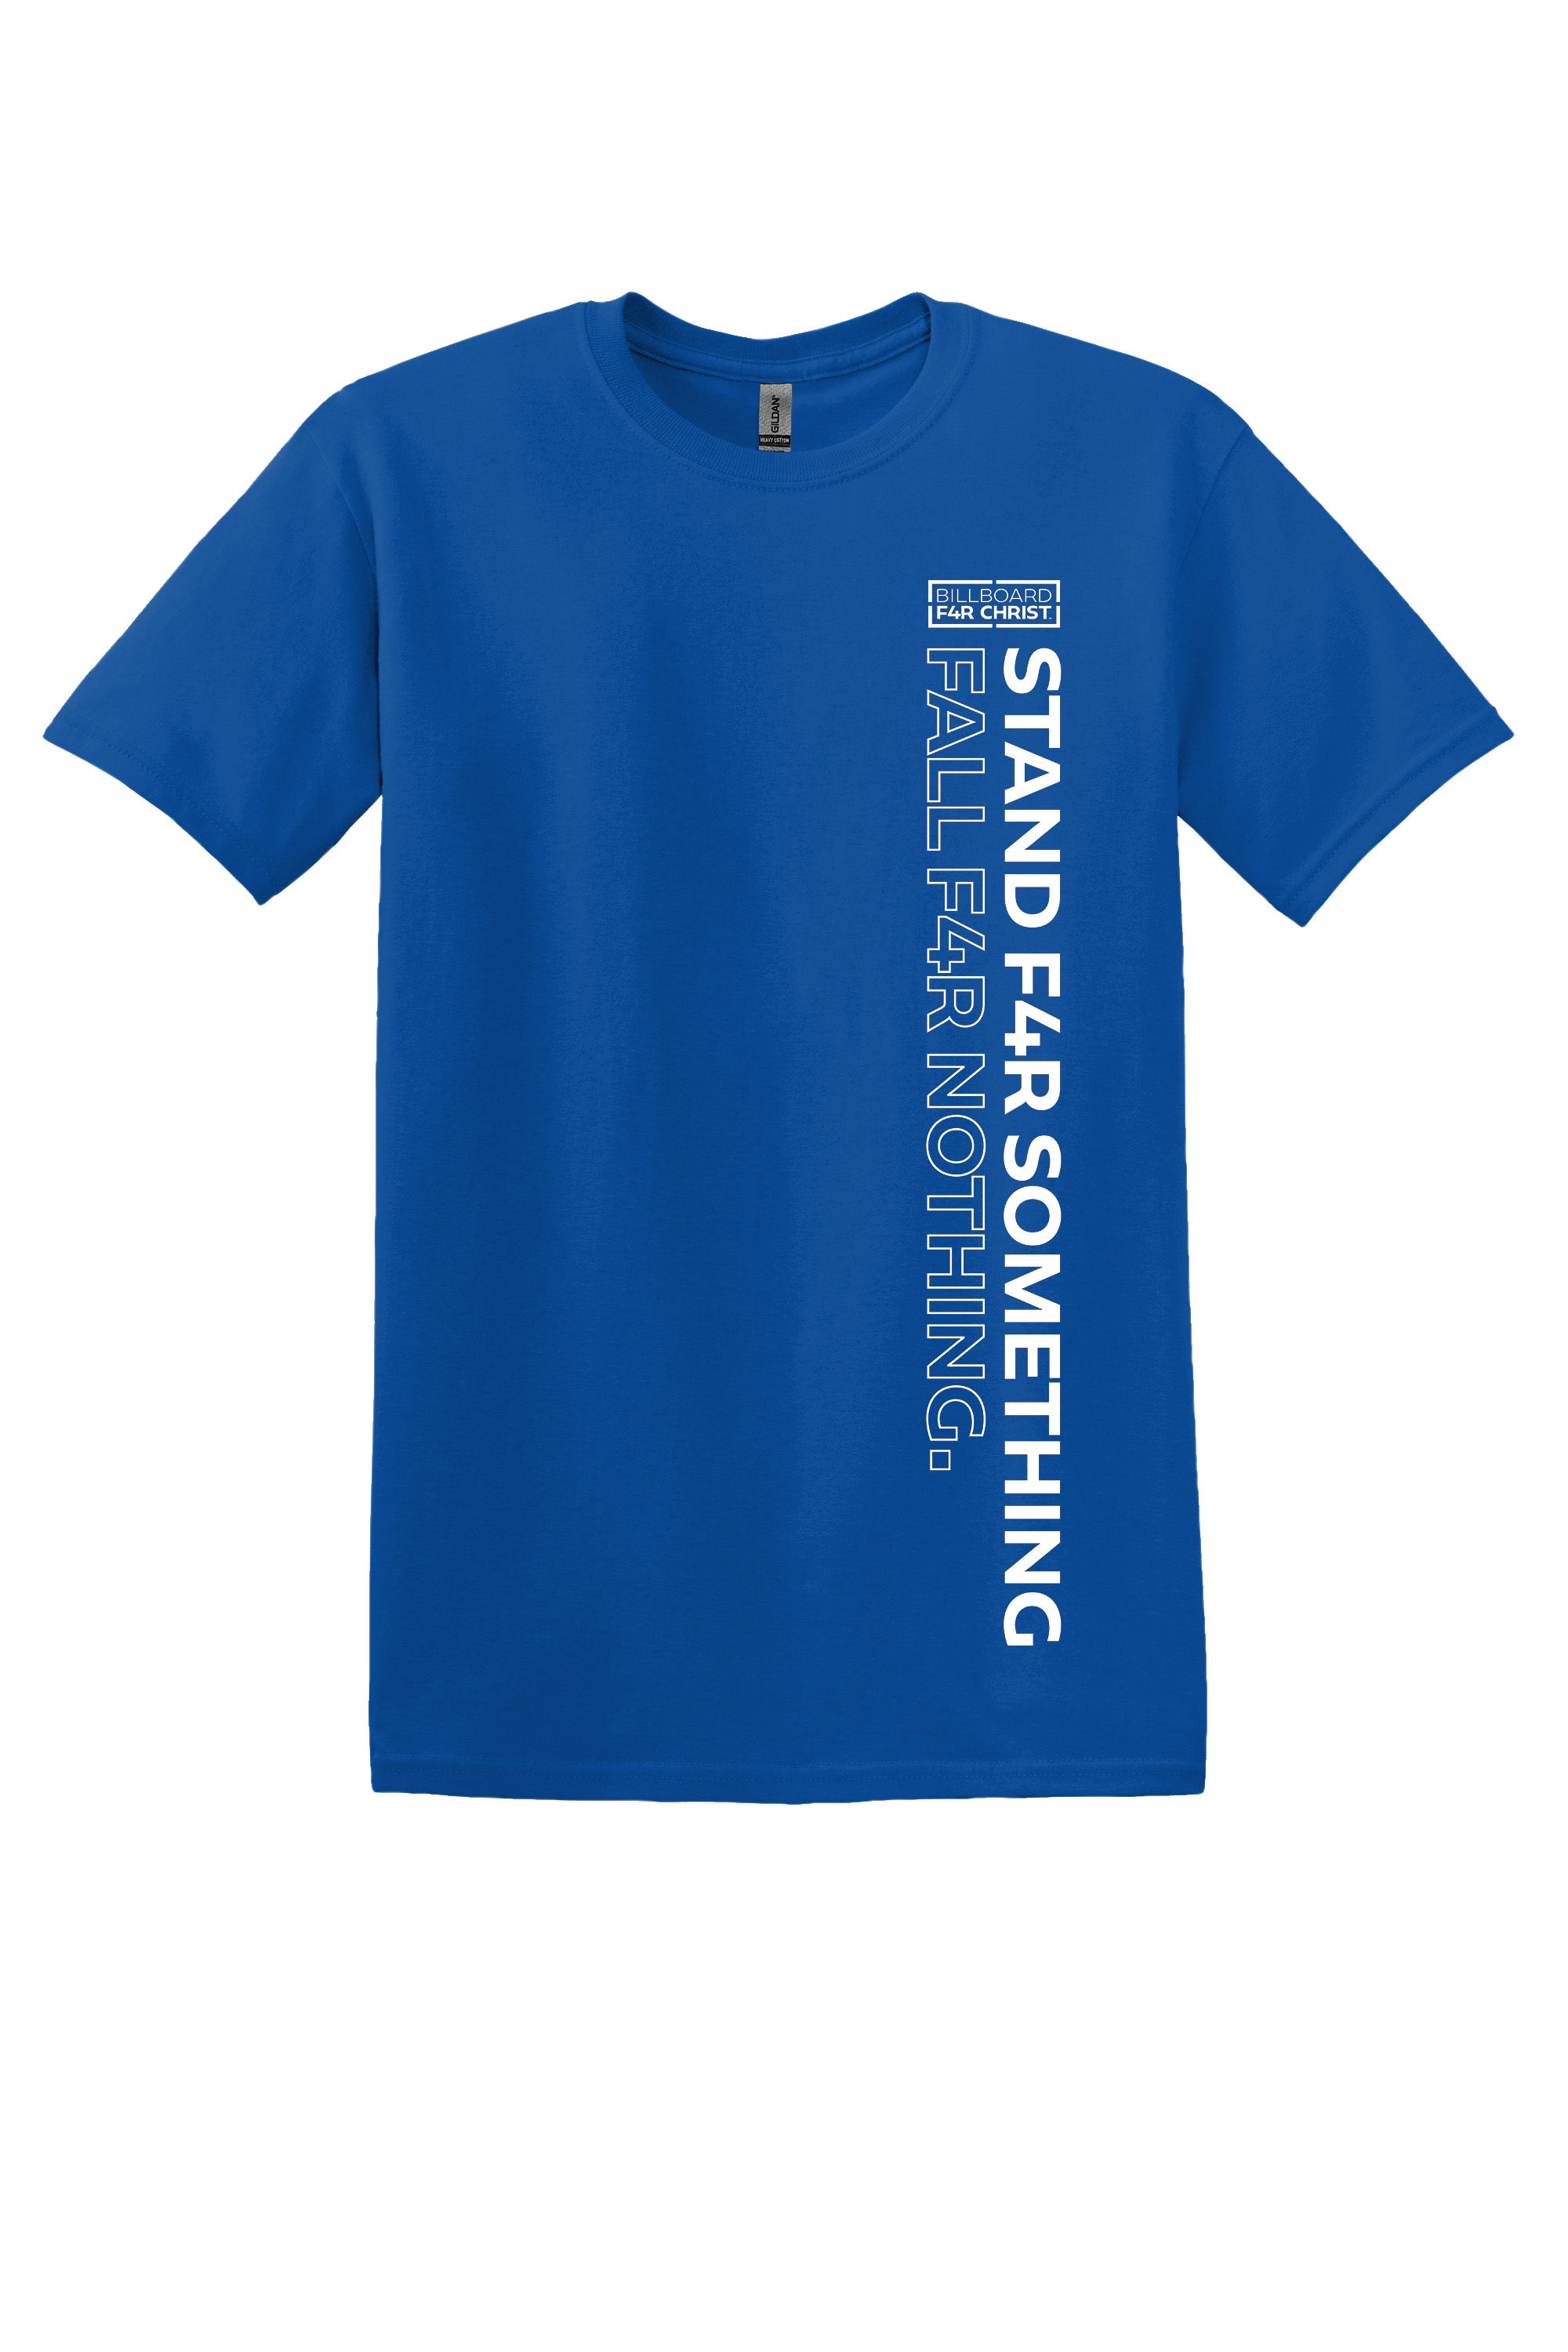 Stand F4R Something Men's Durable T-Shirt